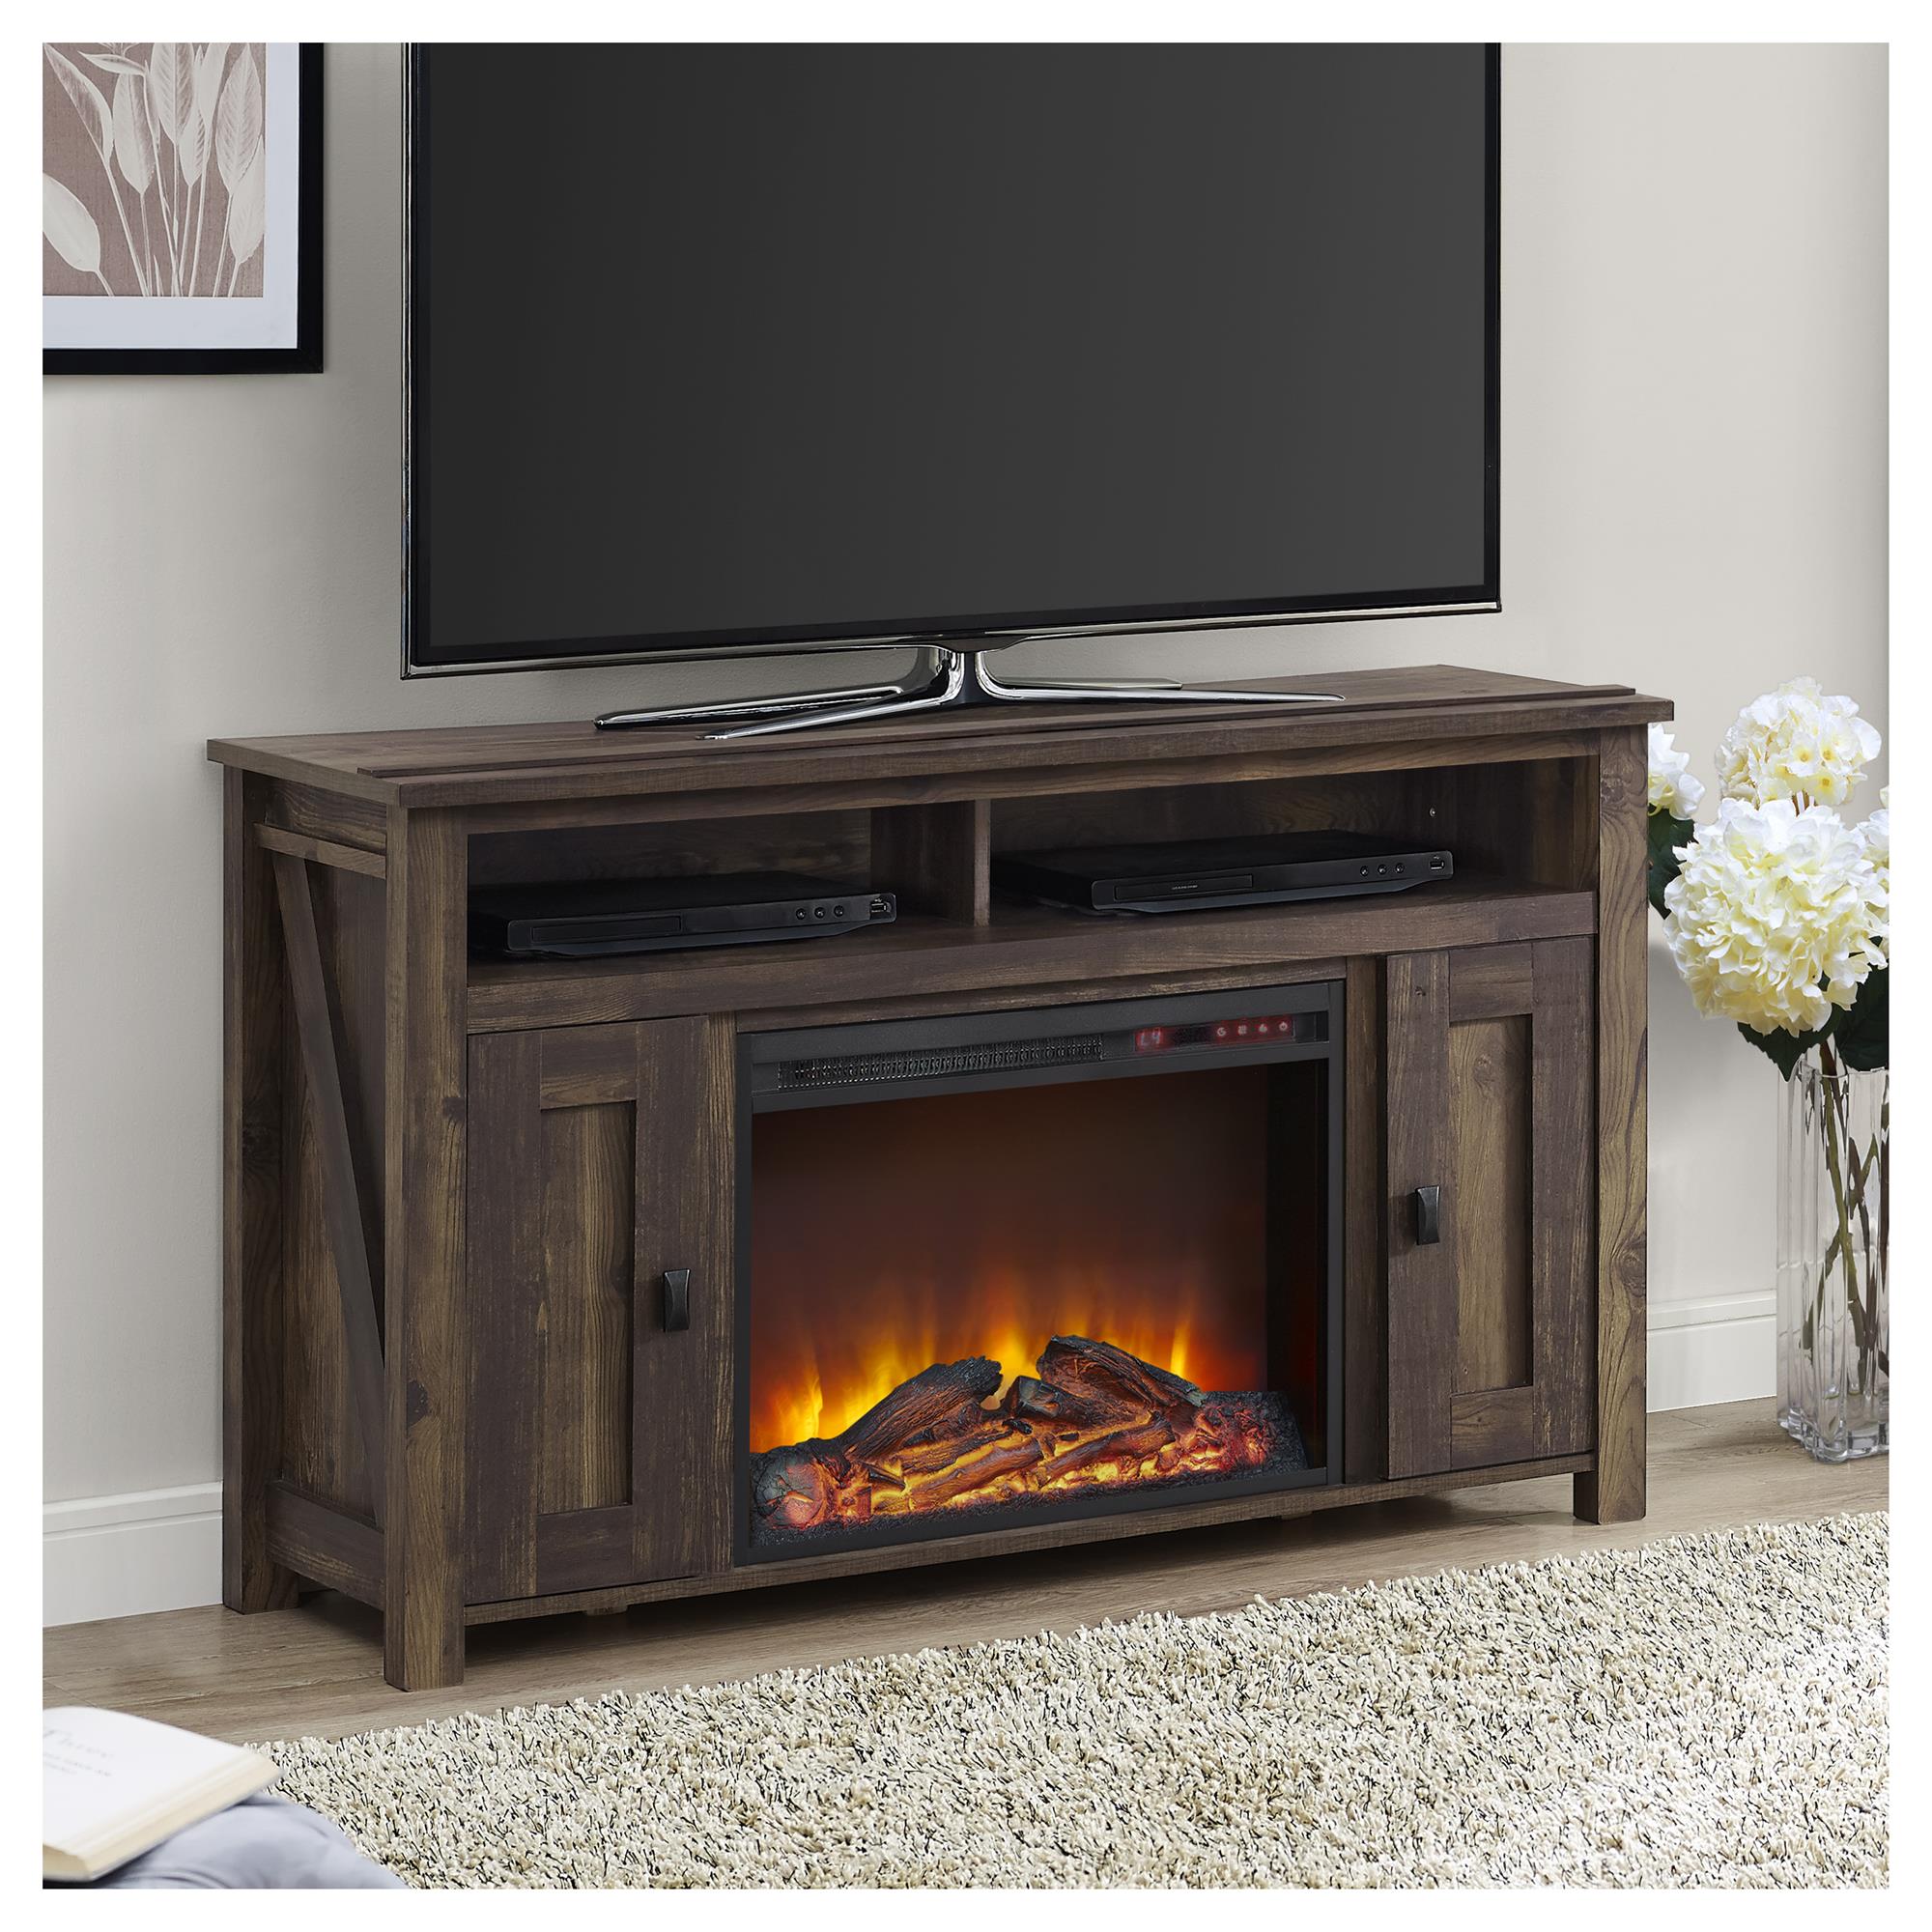 Fireplace Tv Stand 75 Inch New Farmington Electric Fireplace Tv Console for Tvs Up to 50